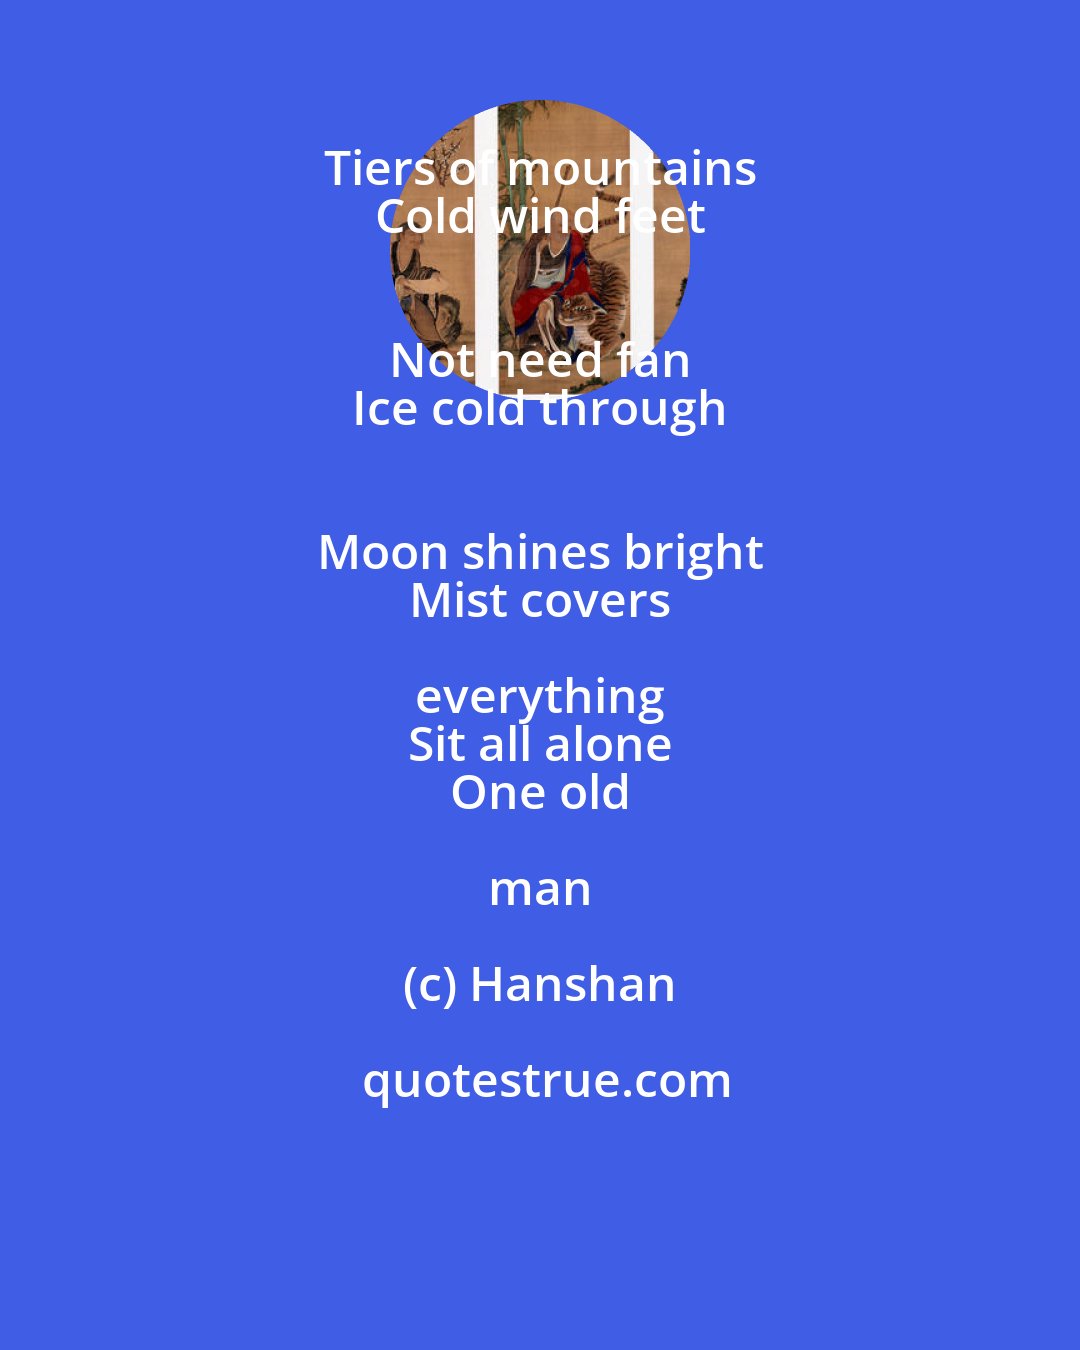 Hanshan: Tiers of mountains 
 Cold wind feet 
 Not need fan 
 Ice cold through 
 Moon shines bright 
 Mist covers everything 
 Sit all alone 
 One old man